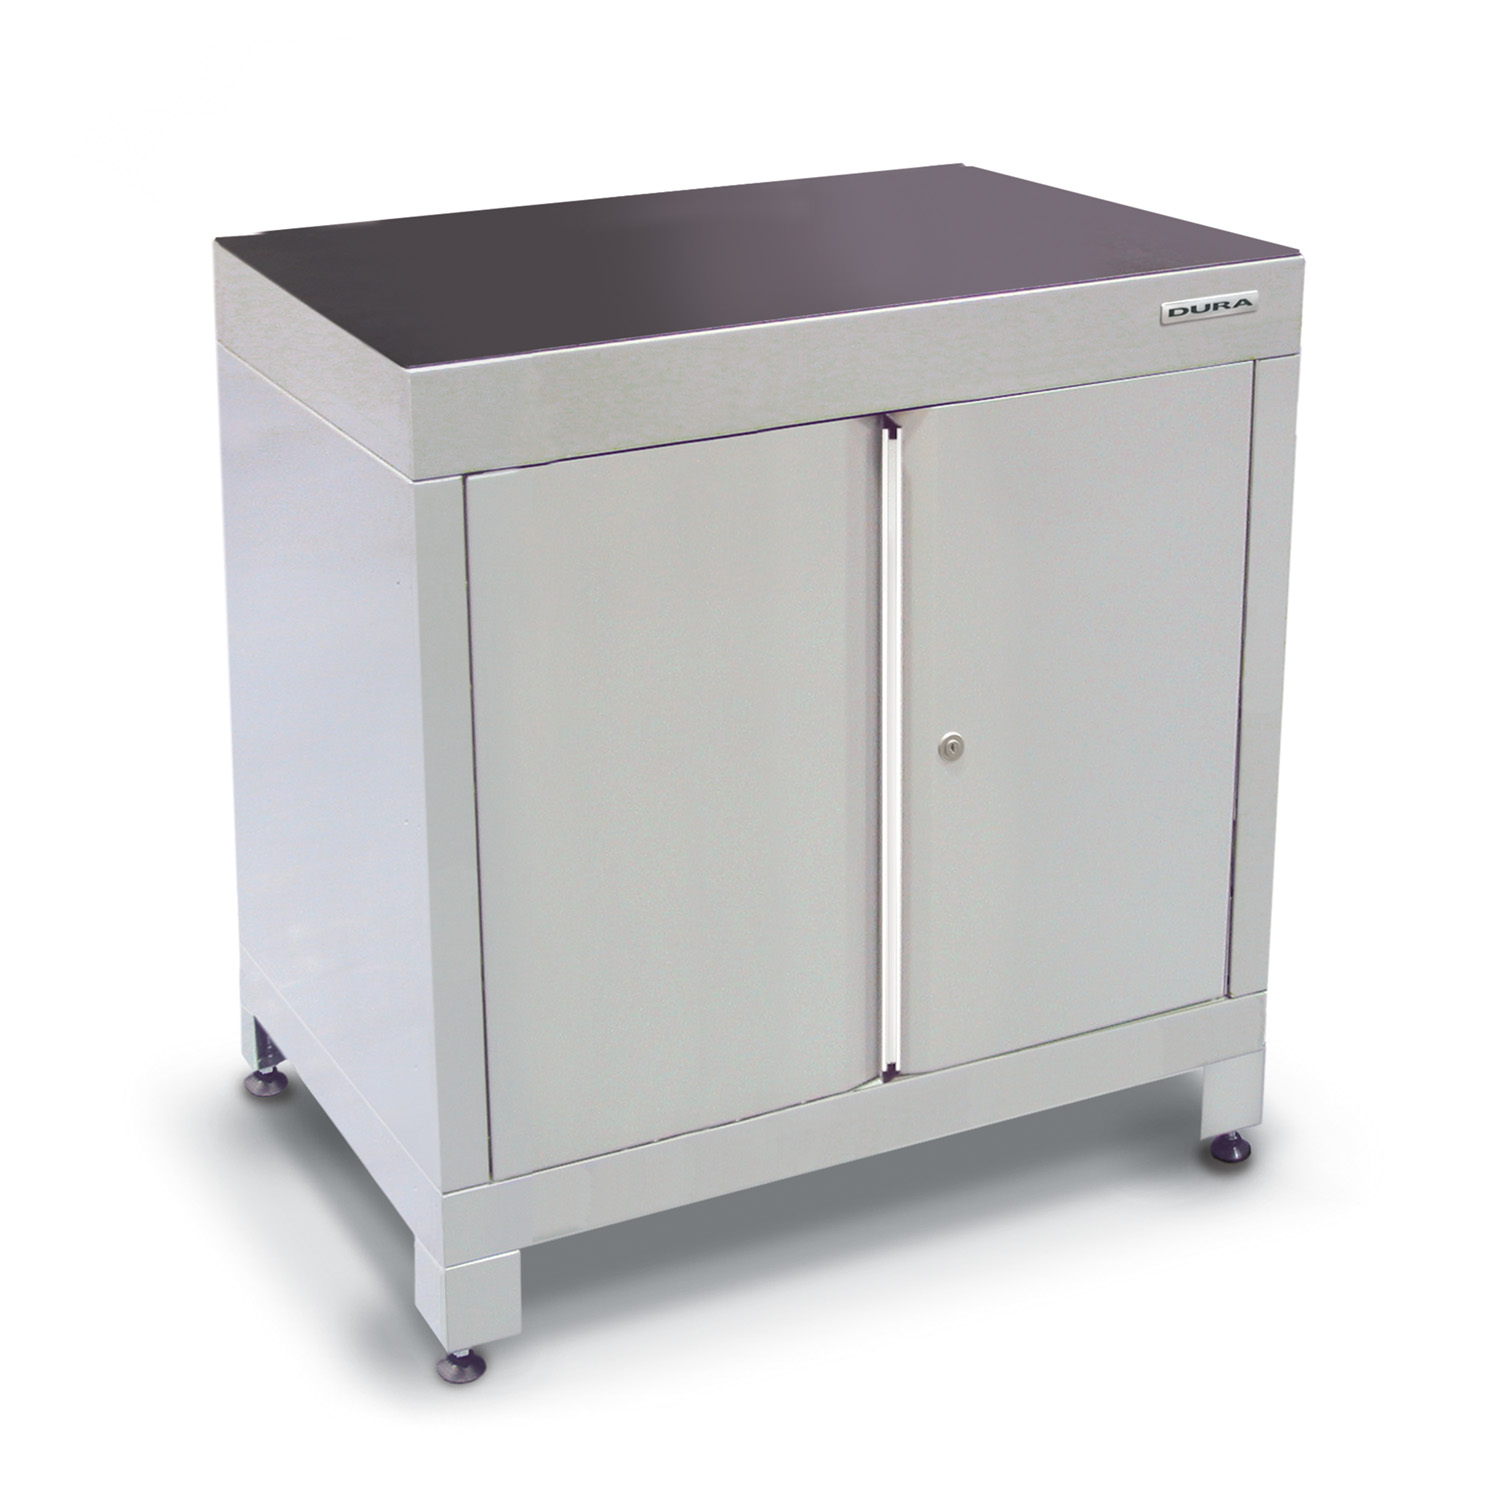 900mm wide base cabinet (double hinged doors/feet)